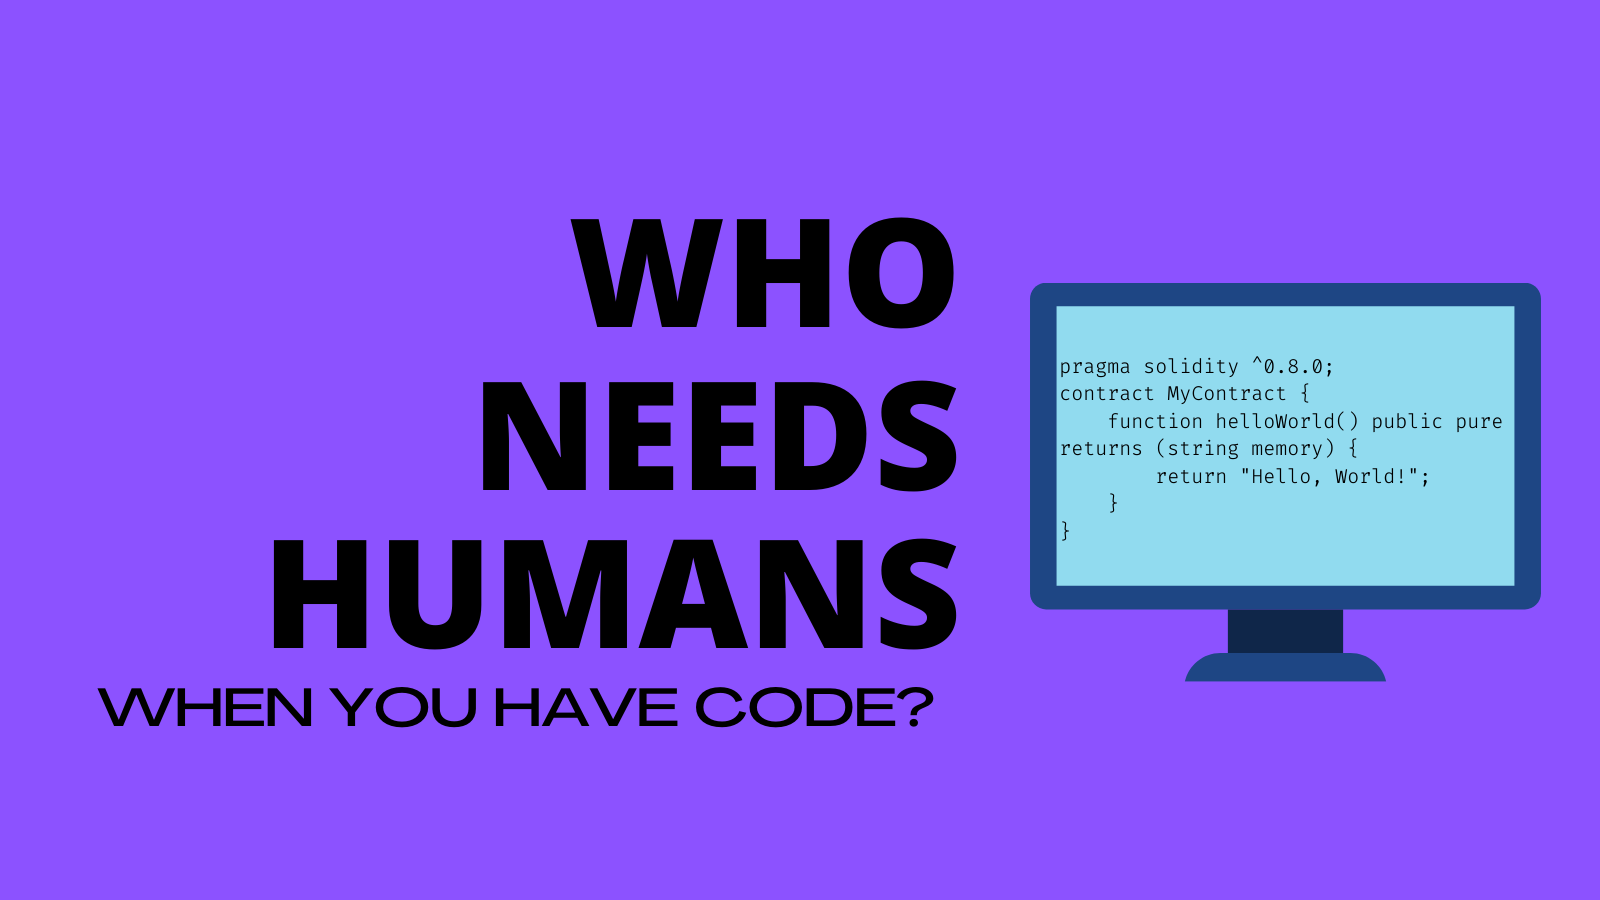 Who needs humans when you have code?